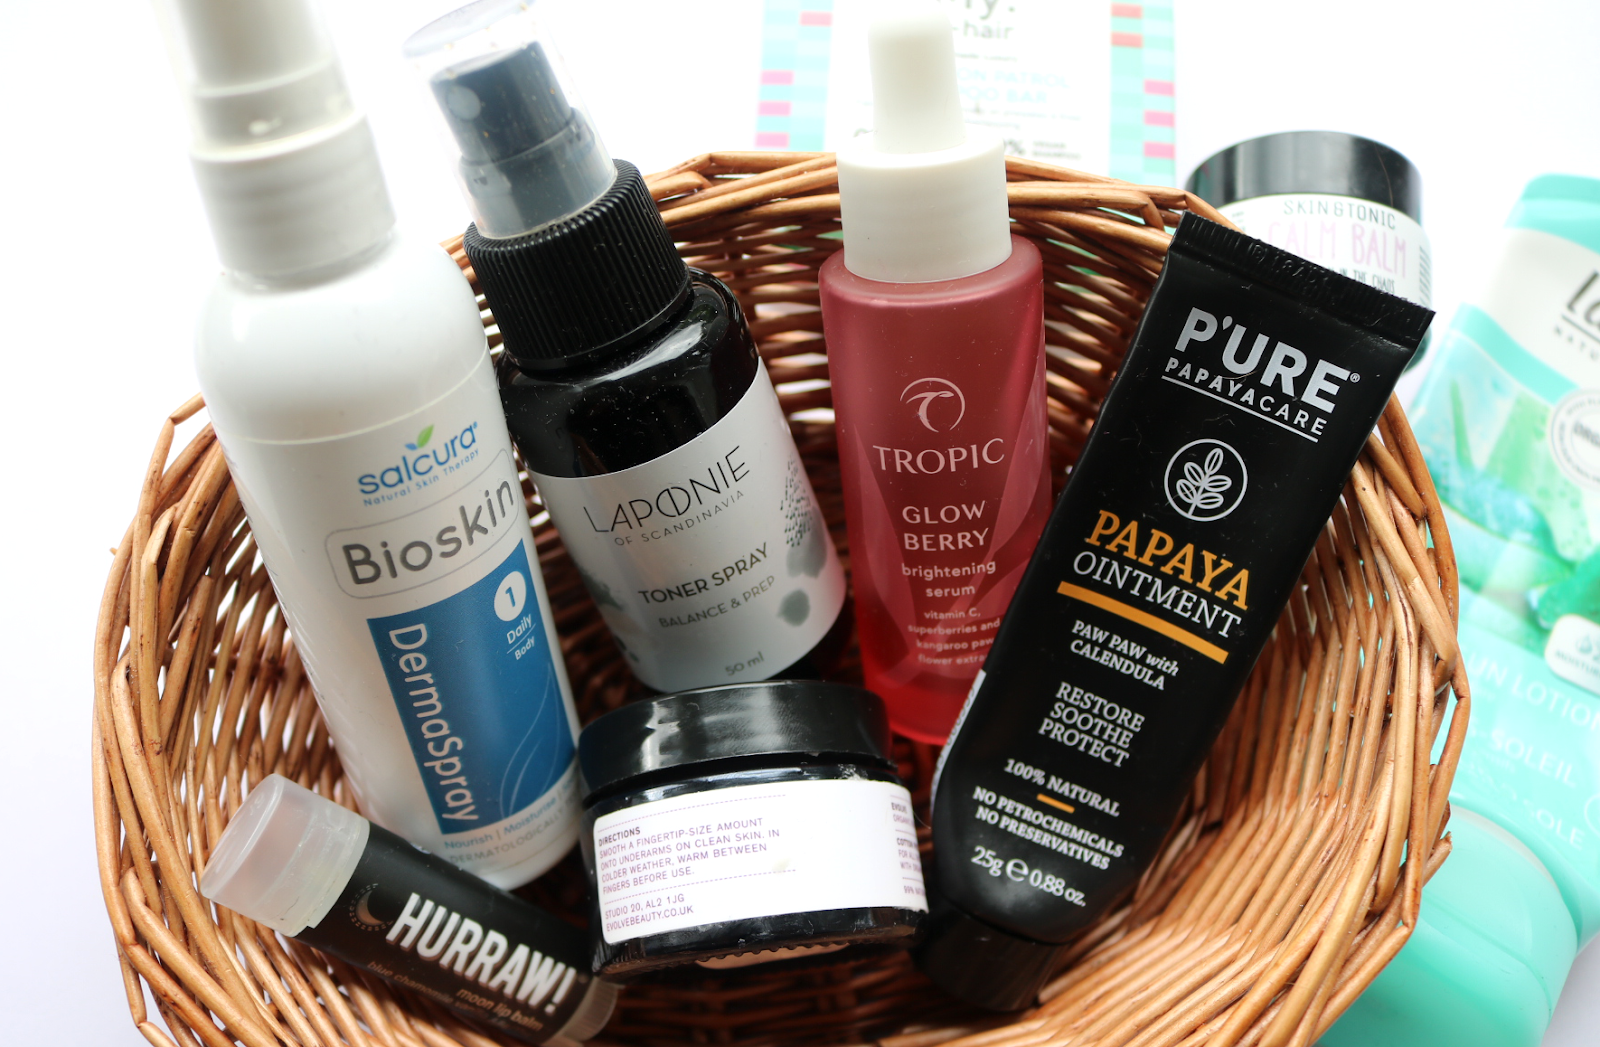 June Empties: Products I've Used Up